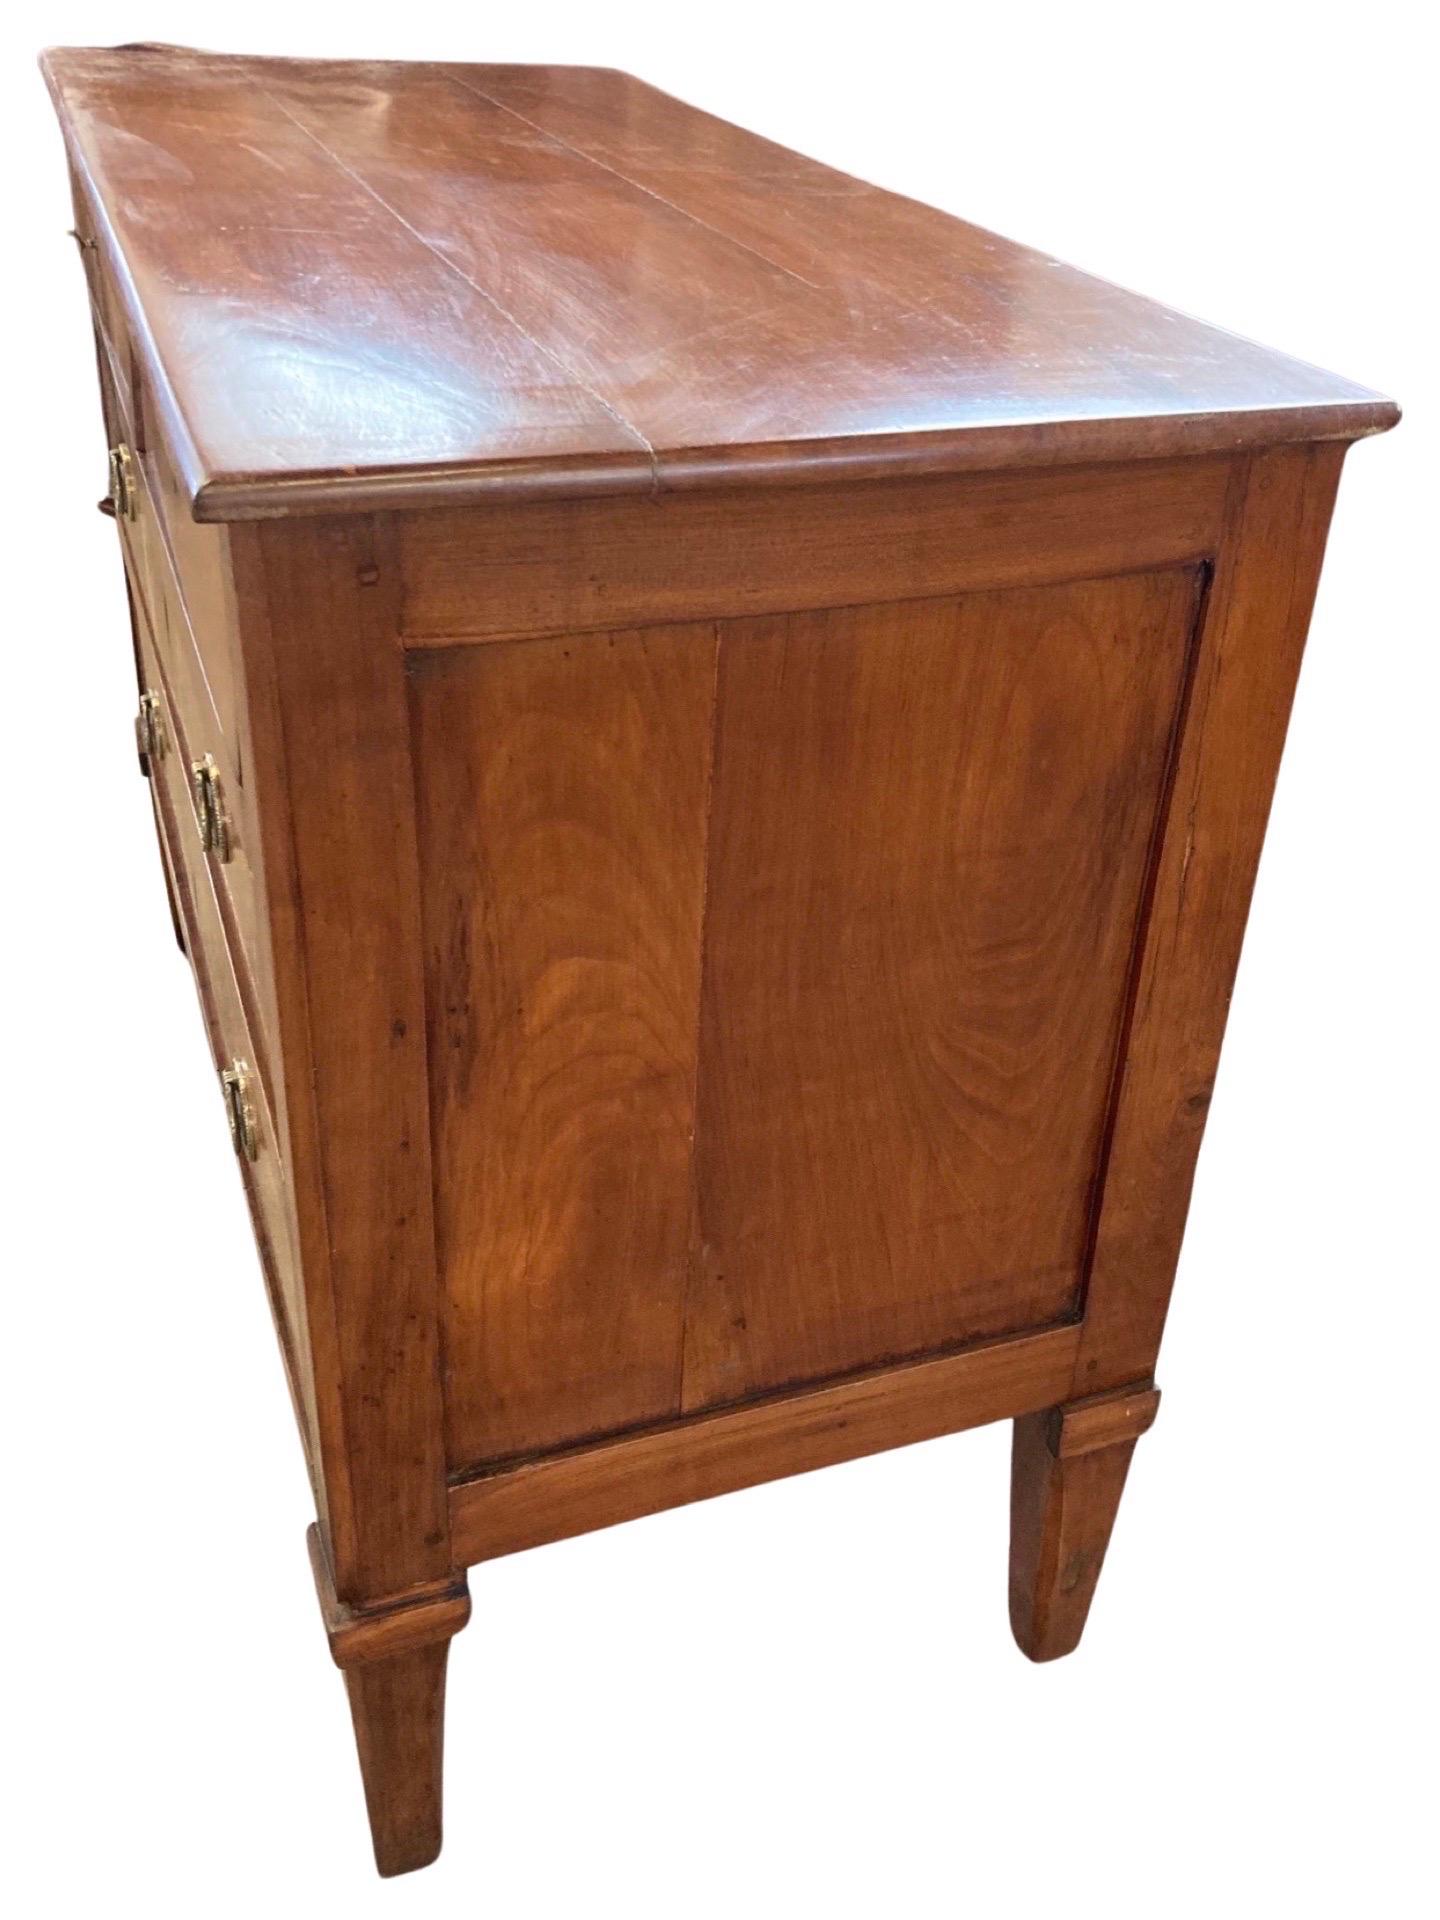 Neoclassical commode hand-made in Italy in the early 1800s using cherry and pegged construction. This is a beautifully-made and fully functional two on two chest of drawers. The chest features two small inset drawers on top of two larger inset